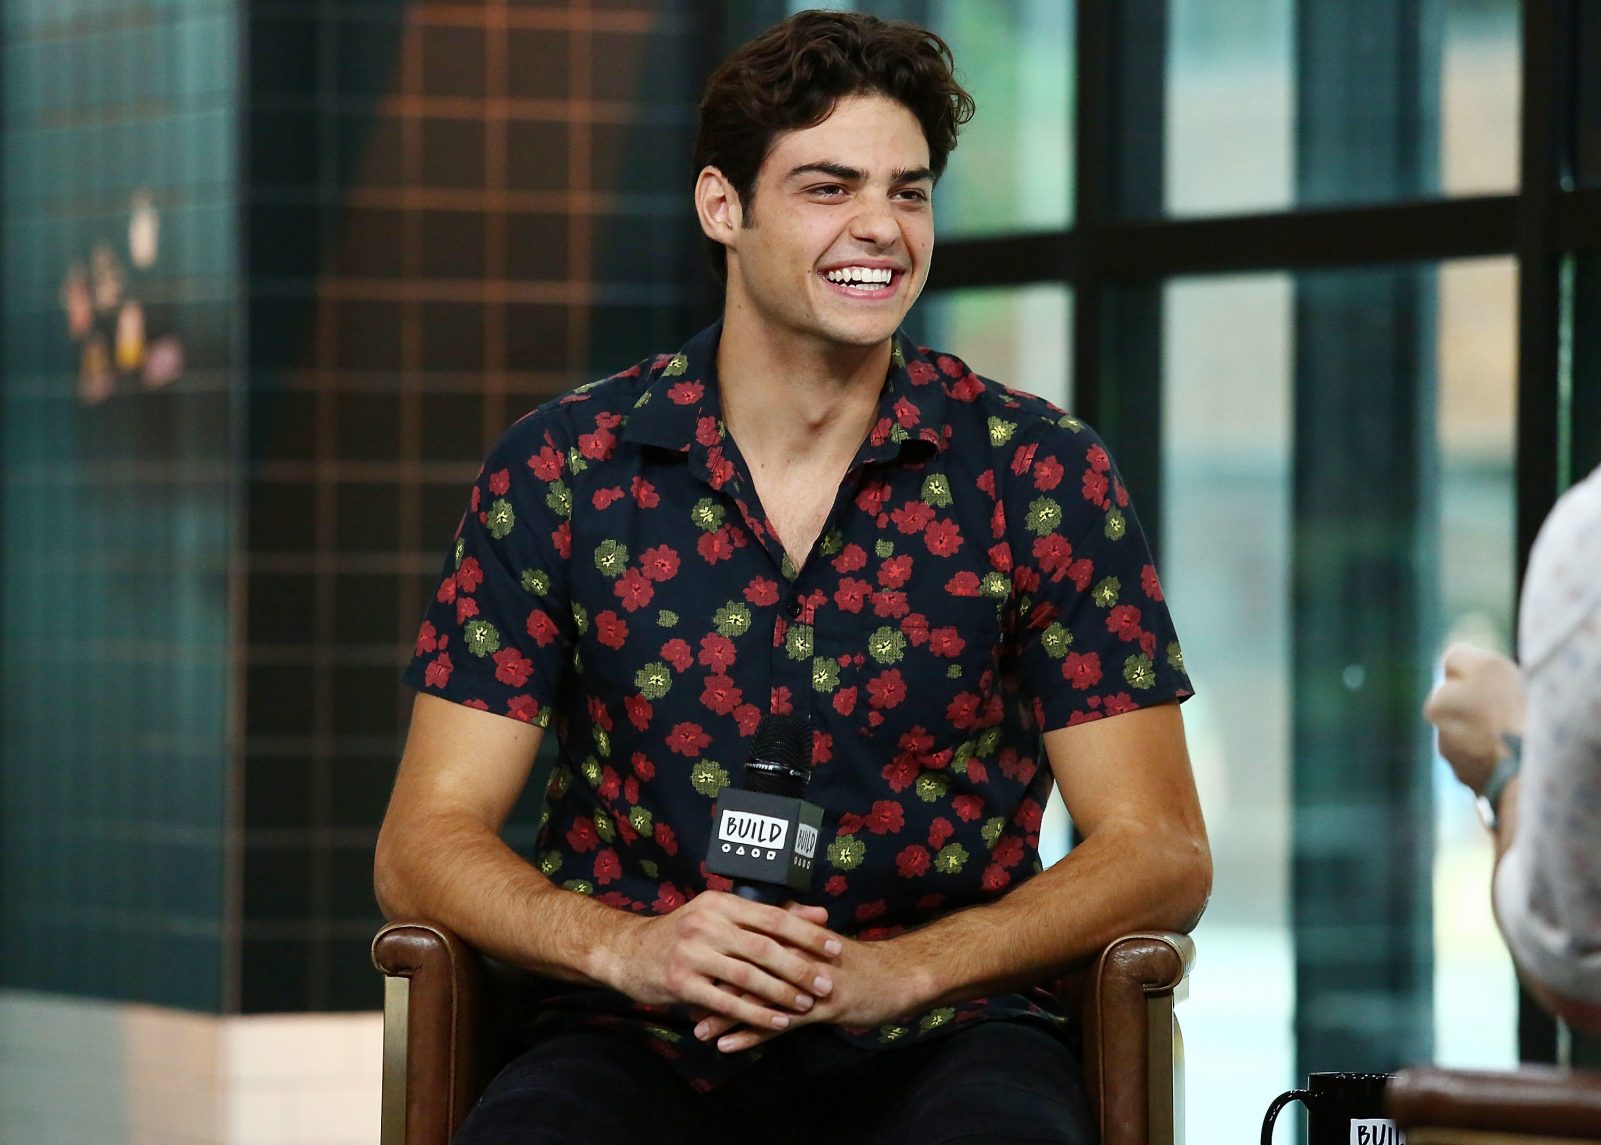 Decide If These Male Celebs Are Attractive to Find Out What Your ❤️ Romantic Personality Is noah centineo